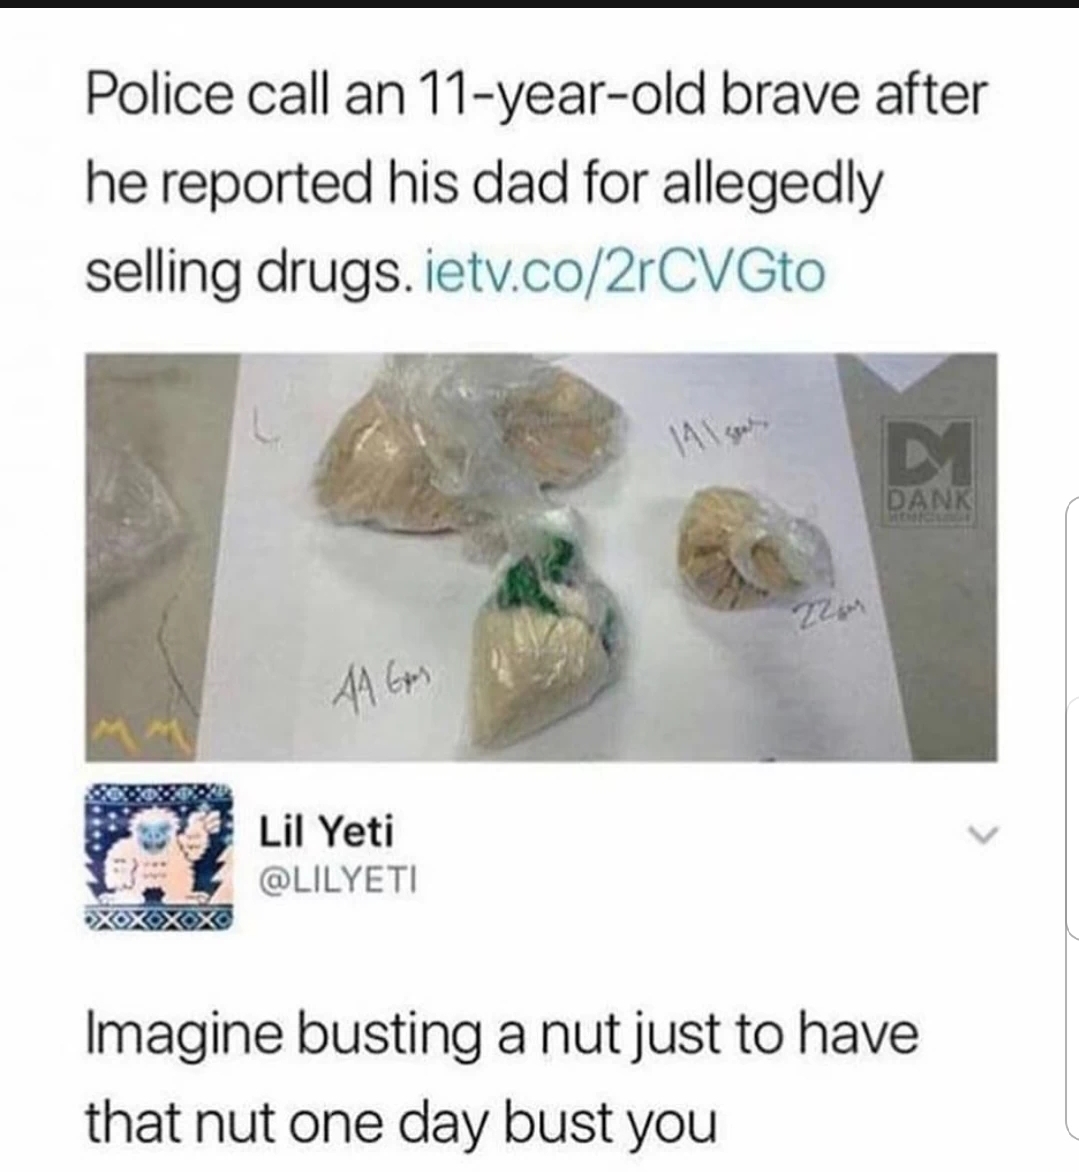 memes - kid calls cops on dad for drugs - Police call an 11yearold brave after he reported his dad for allegedly selling drugs. ietv.co2rCVGto Dank Lil Yeti Imagine busting a nut just to have that nut one day bust you